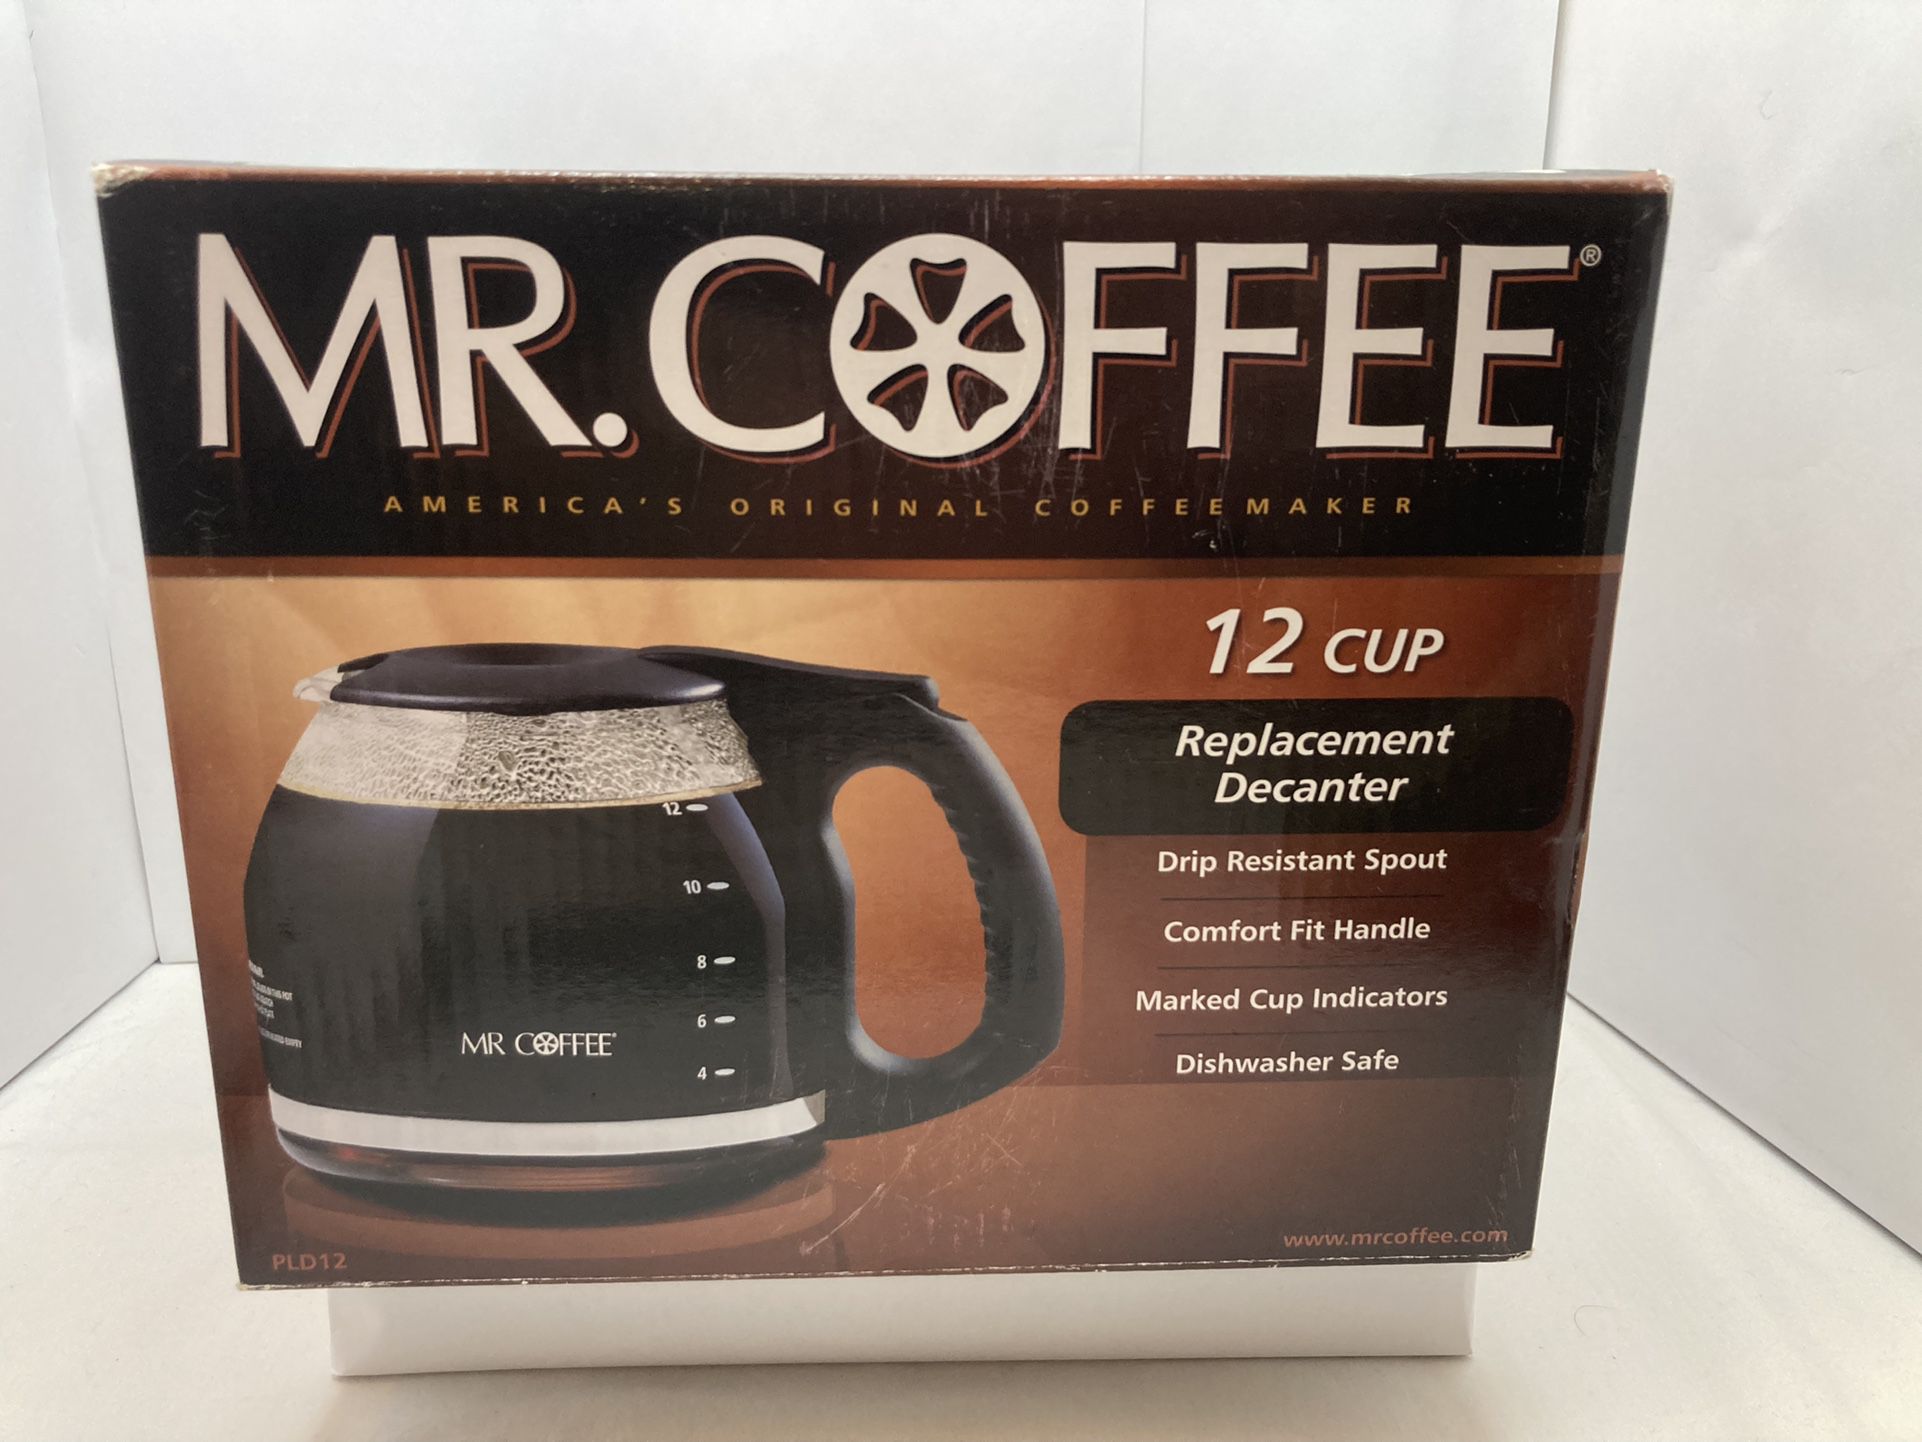 Mr Coffee 12 Cup Replacement Decanter PLD12 Black Glass Pot New In Box-Free Ship.  Box has cosmetic and shelf wear: See Photos!!!